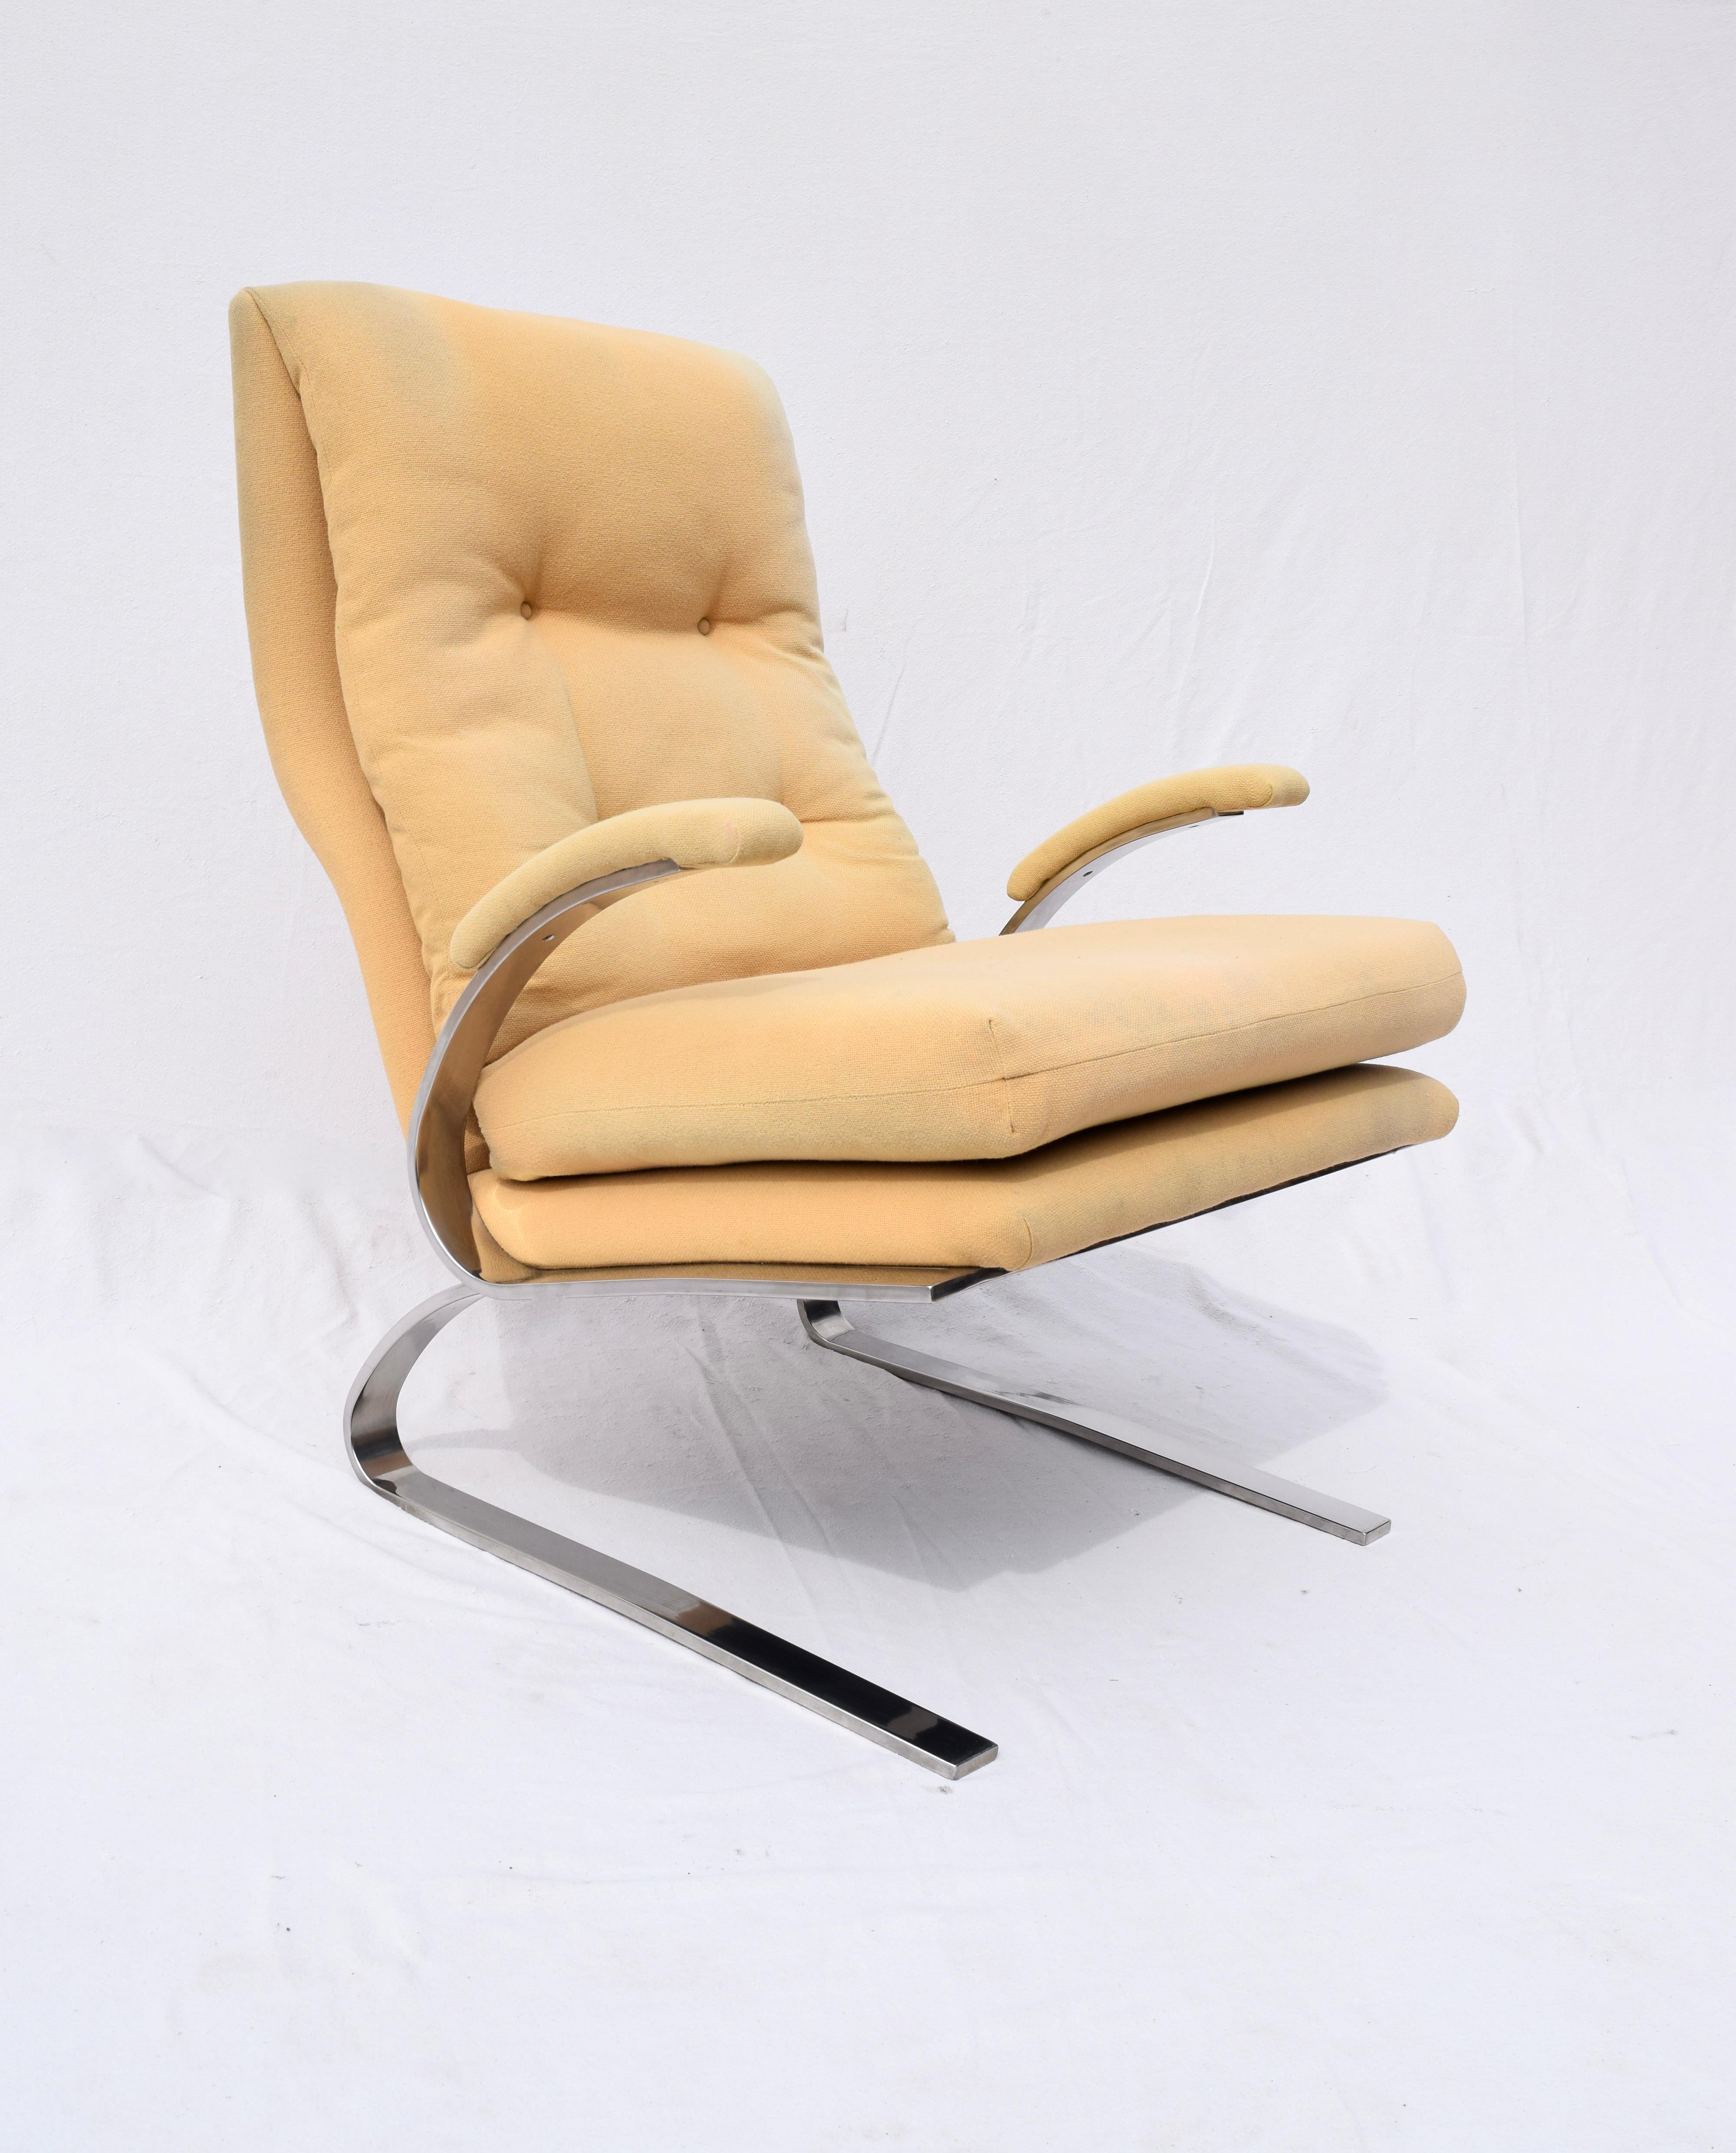 Marvelously comfortable Milo Baughman chrome chair and ottoman, USA, 1970s.
Dimensions (H.W.D): 42